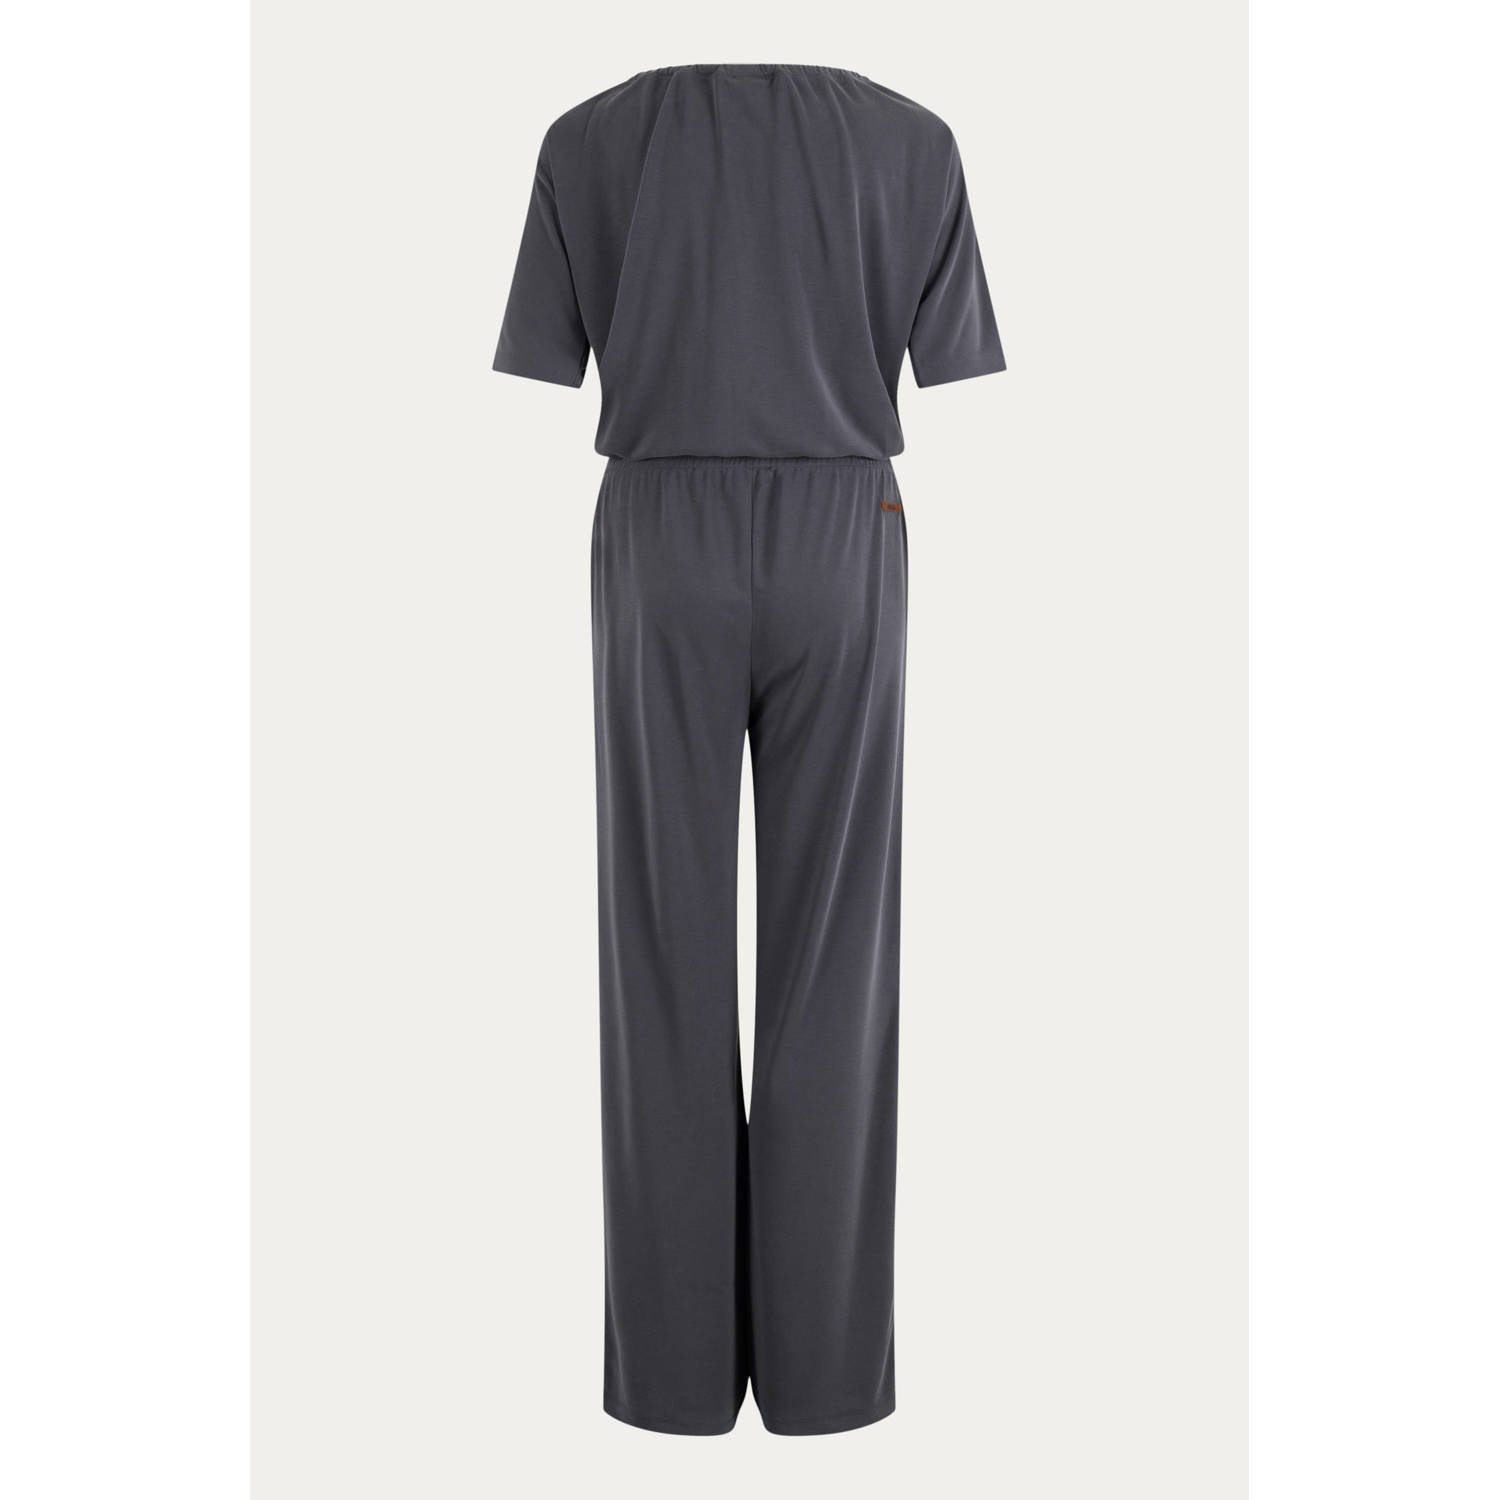 Moscow jumpsuit donkergrijs